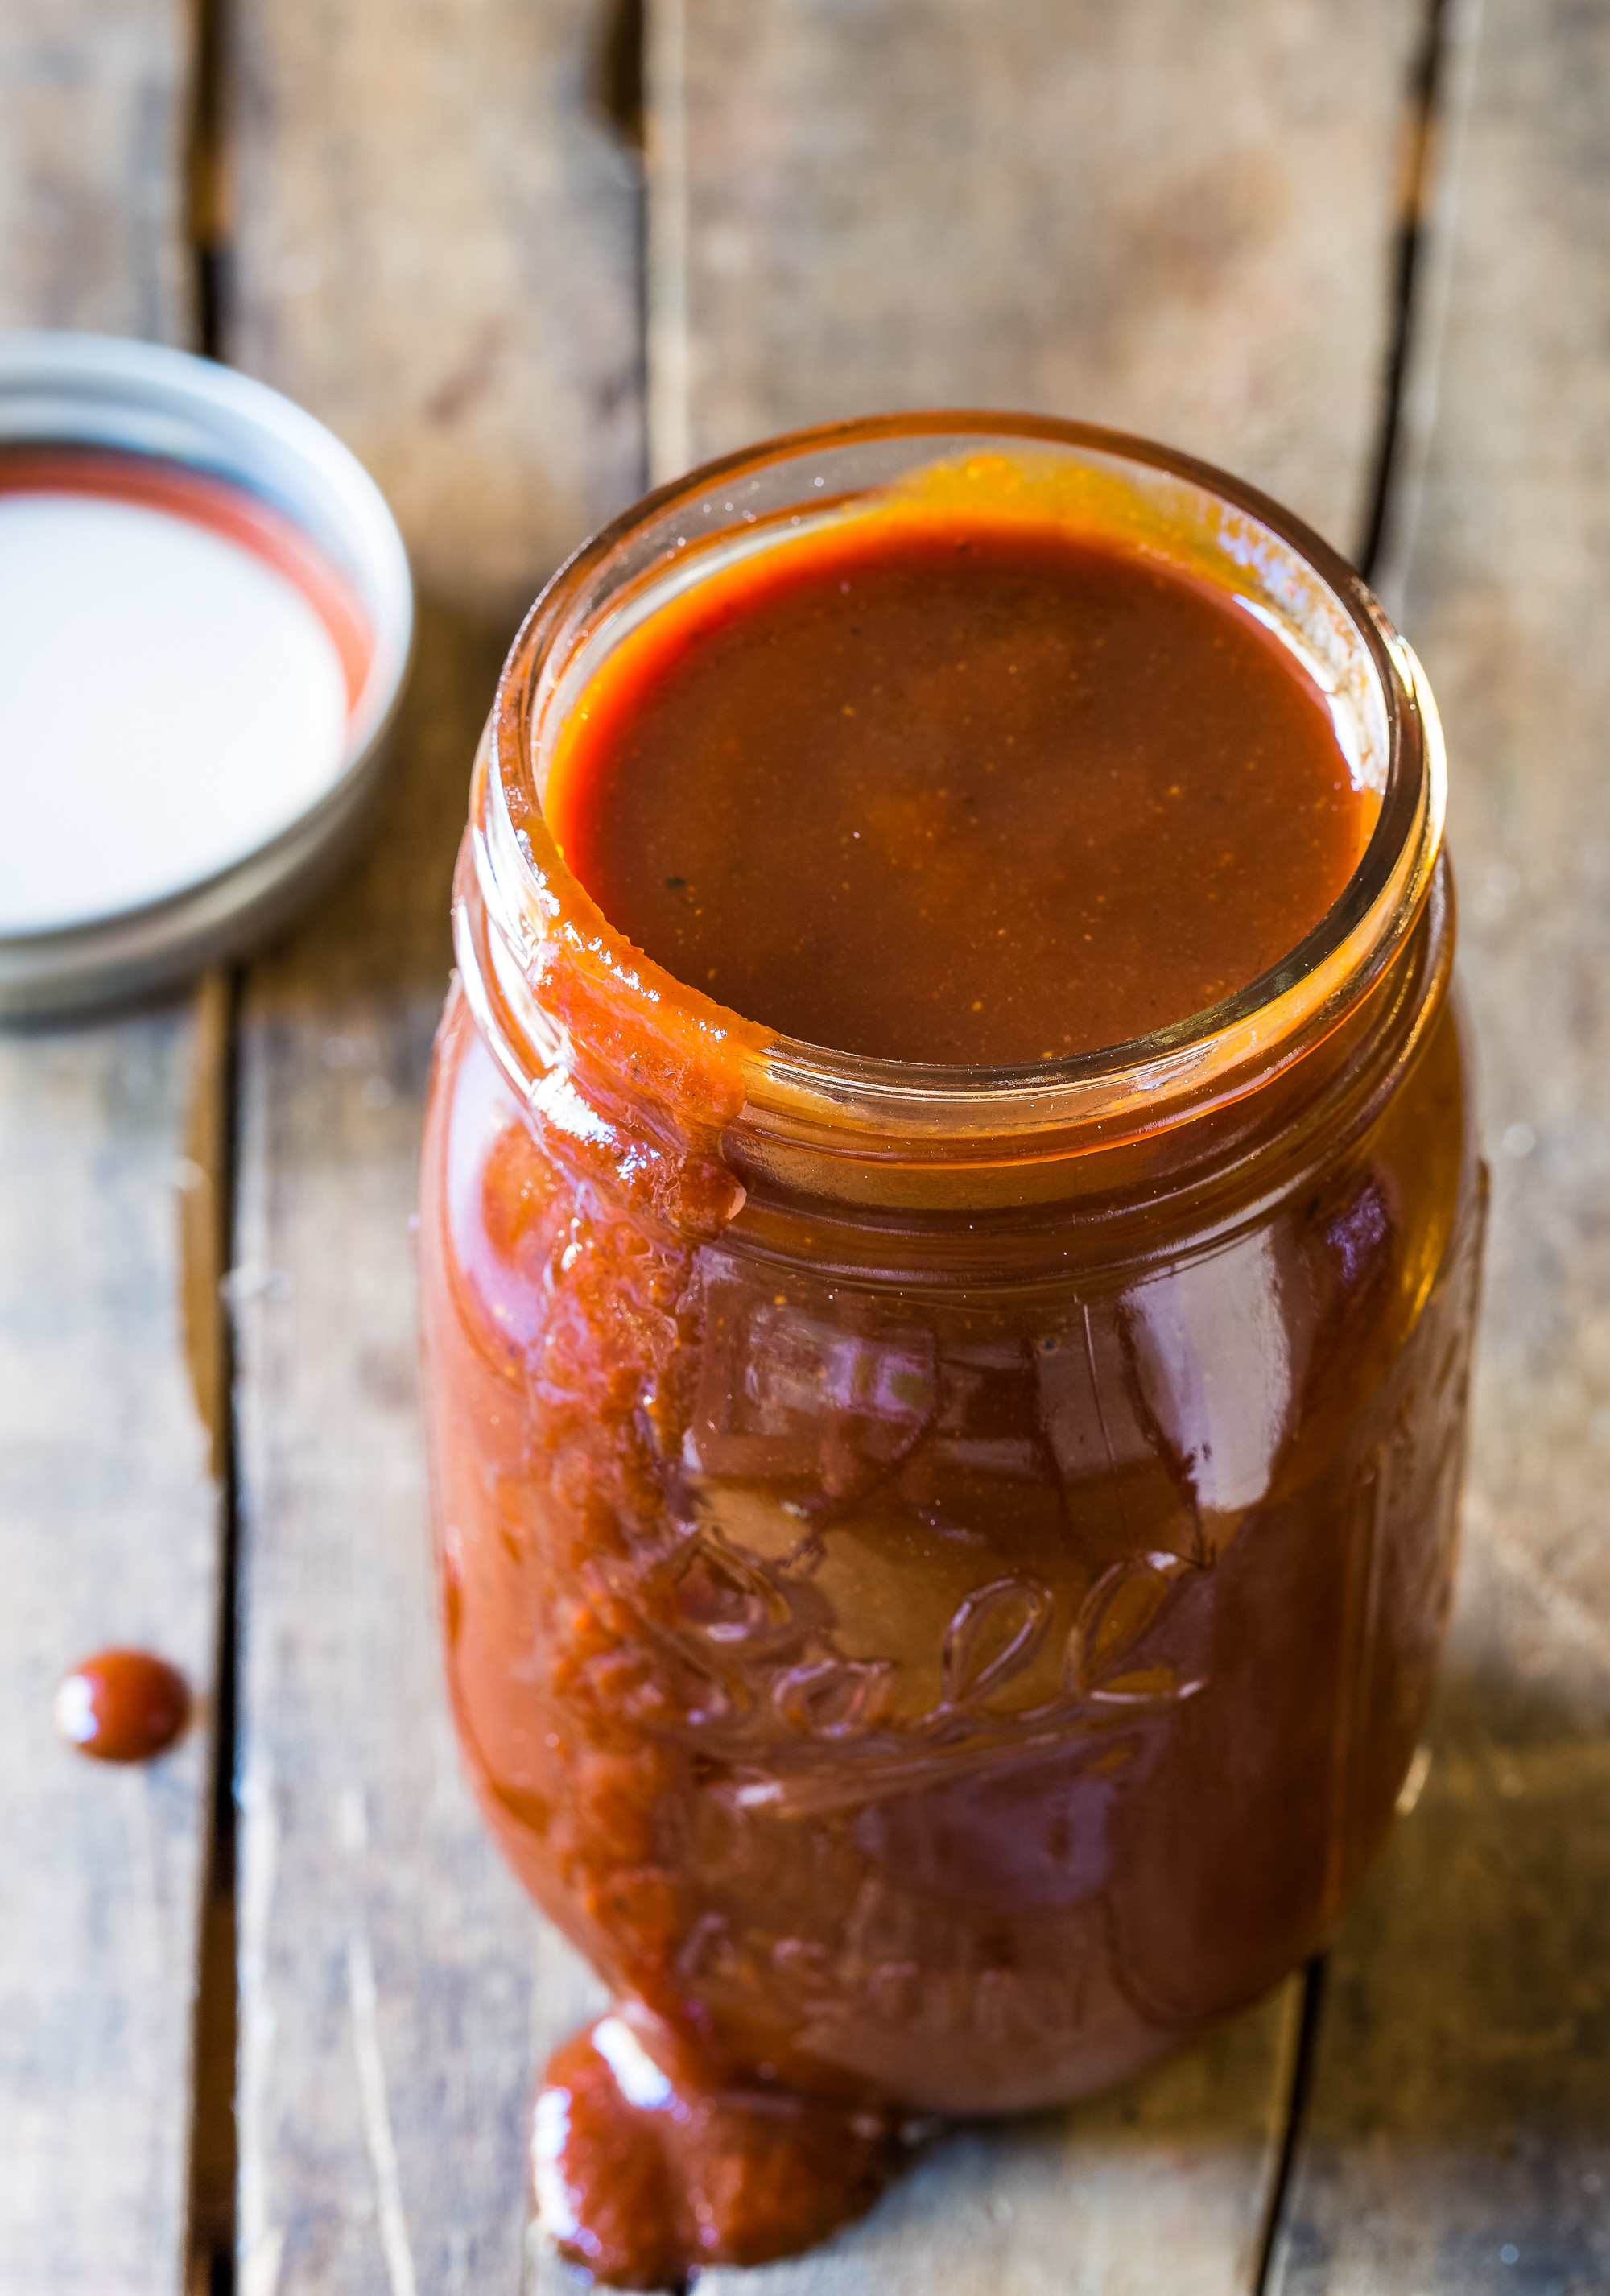 How To Make Bbq Sauce
 How to Make Barbecue Sauce